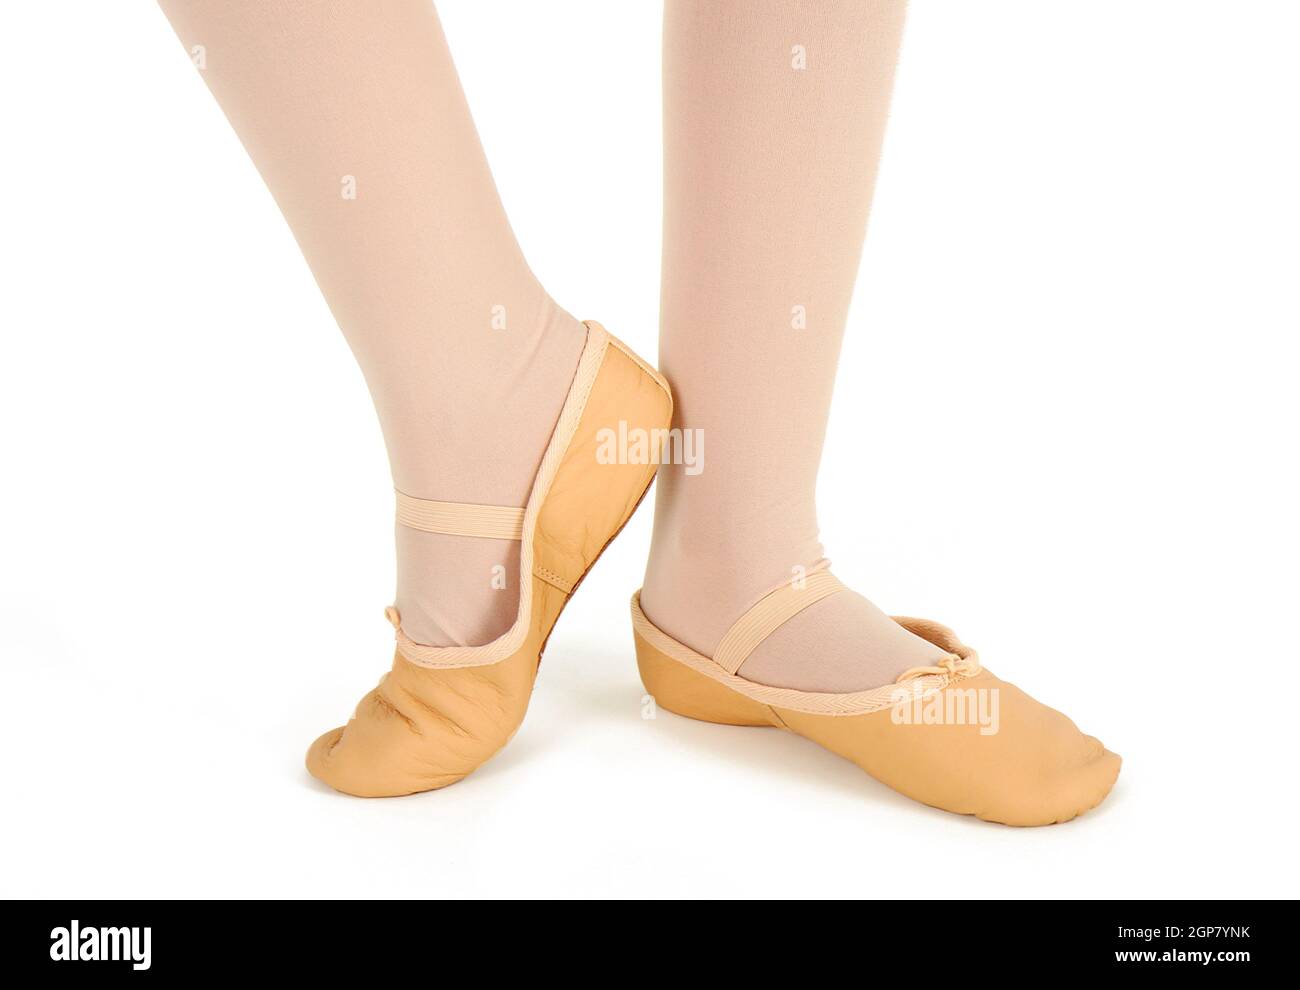 Pointe worn Cut Out Stock Images & Pictures - Alamy